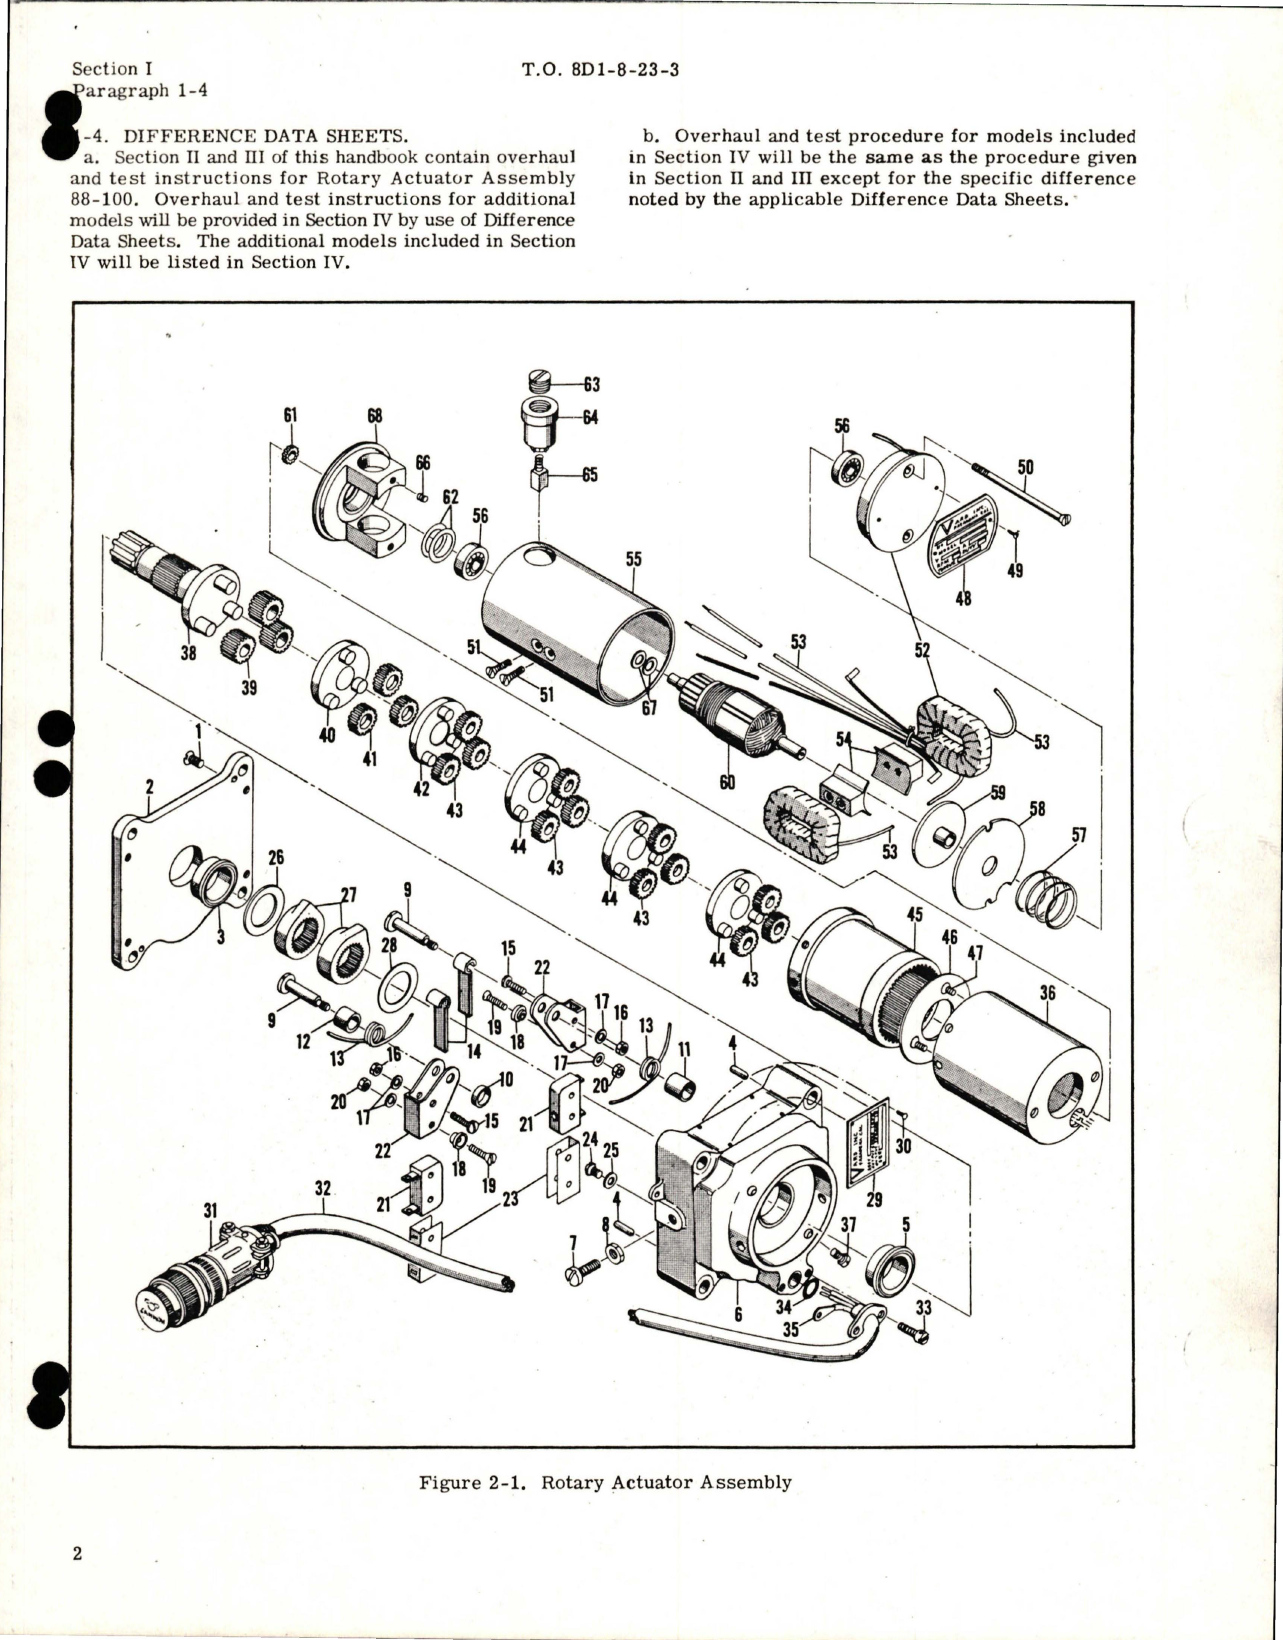 Sample page 5 from AirCorps Library document: Overhaul Instructions for Rotary Actuator - Part 88-100